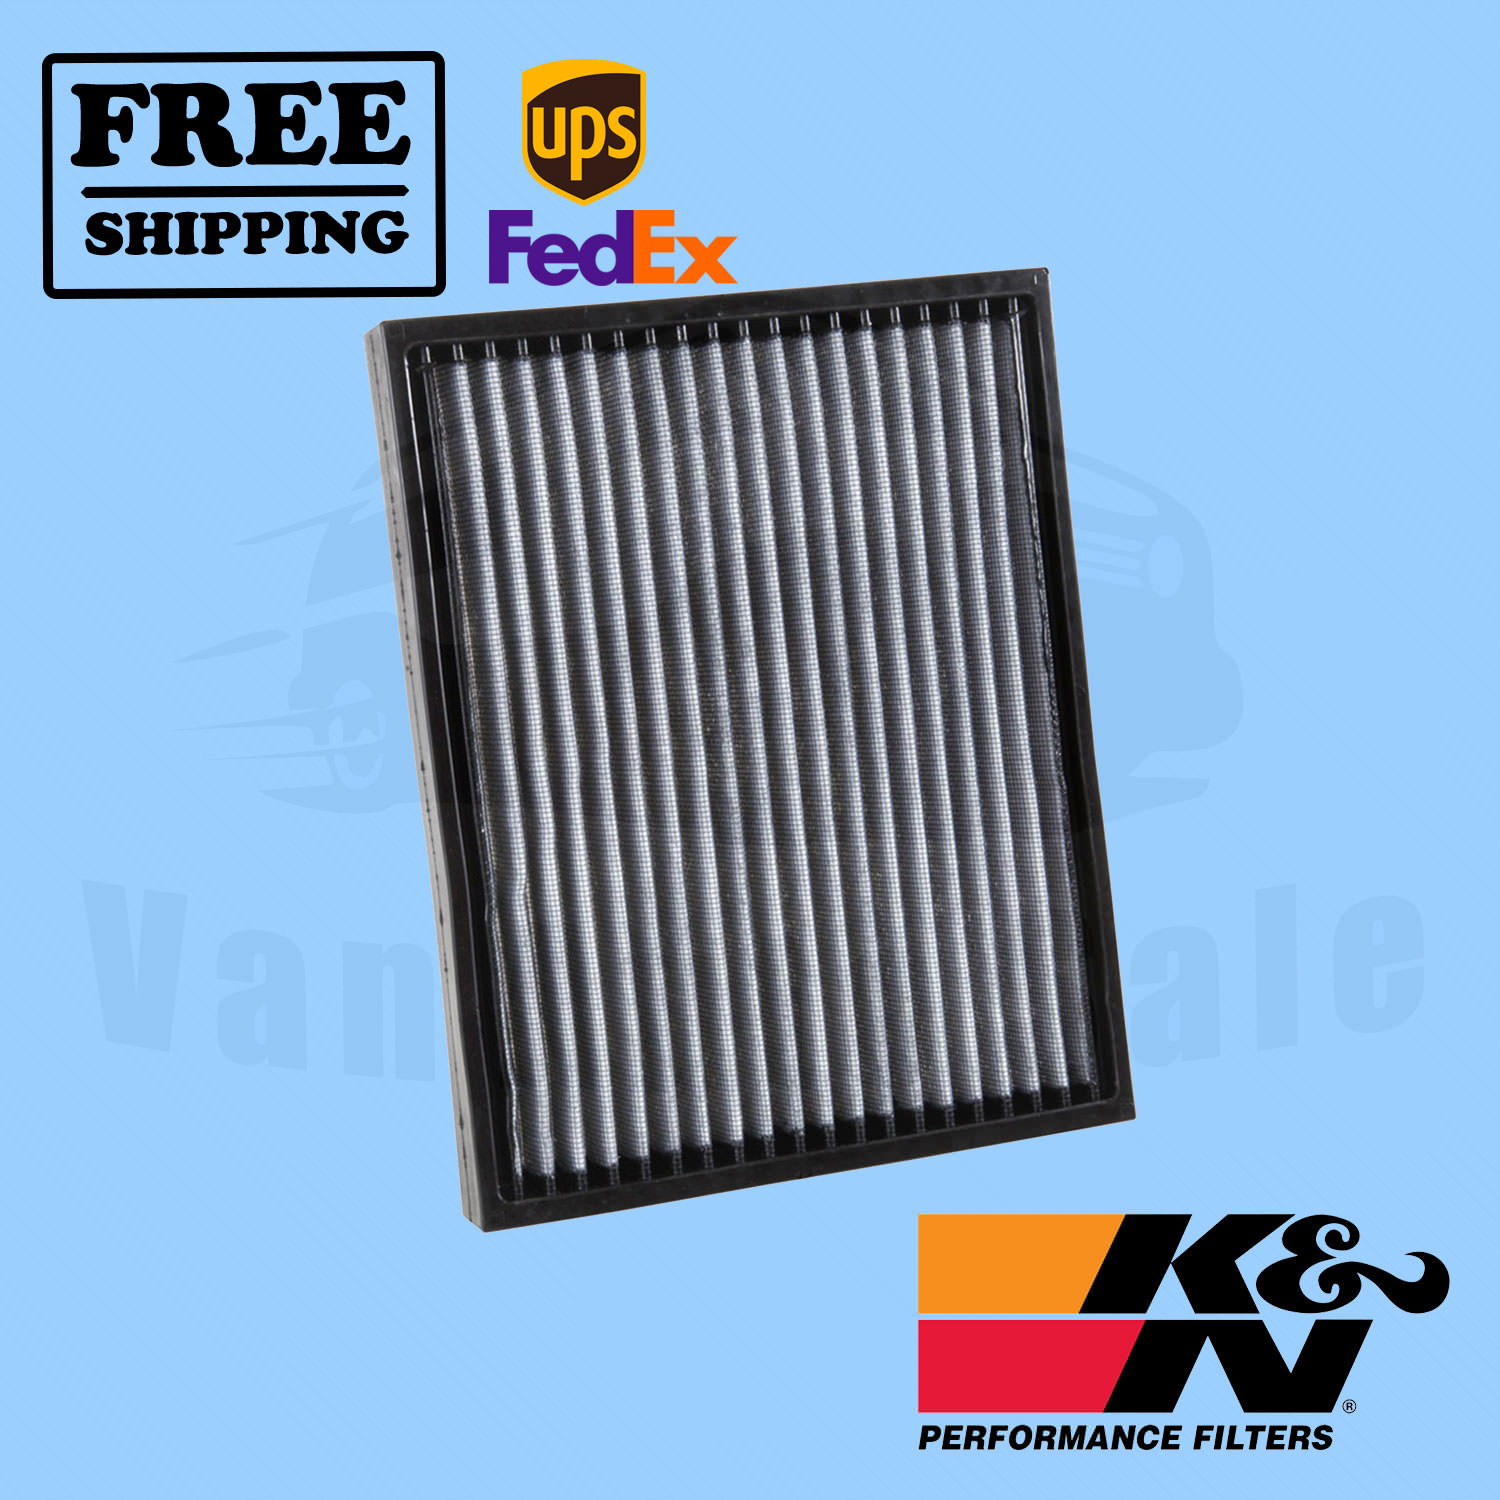 Cabin Air Filter K&N for Ford F-250 Super Duty 2015-2020 | eBay 2015 F250 Super Duty Cabin Air Filter